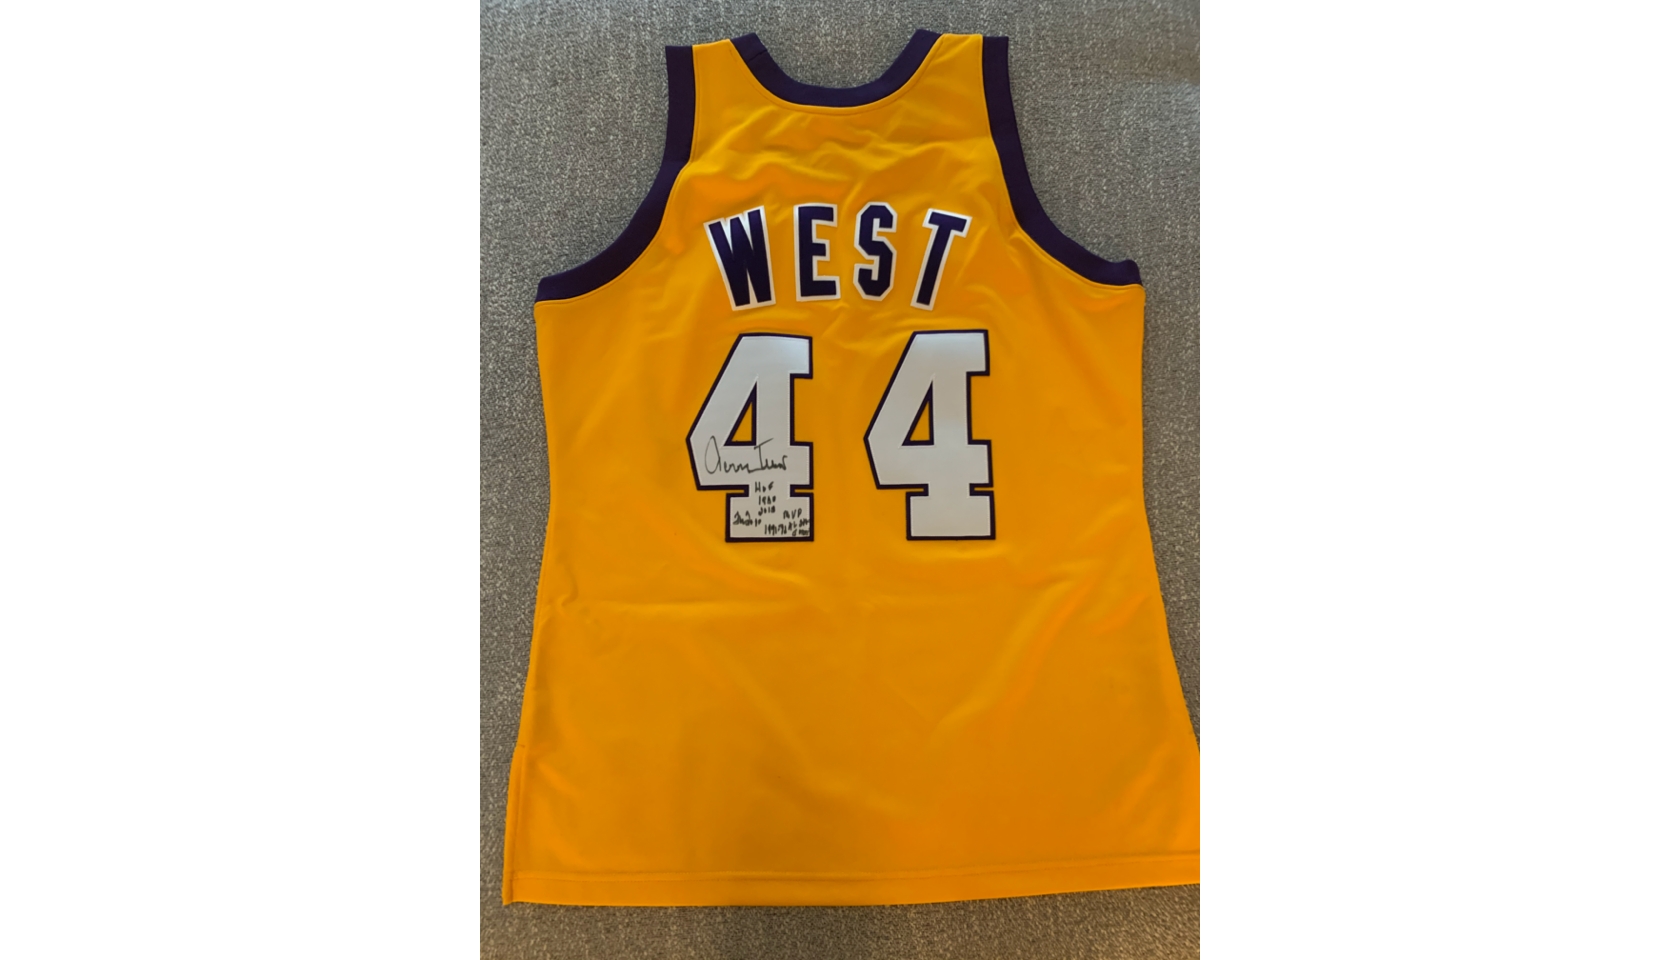 Jerry West Signed Autographed Jersey JSA Authenticated  Yellow/White/Black/Red – Fiterman Sports Group